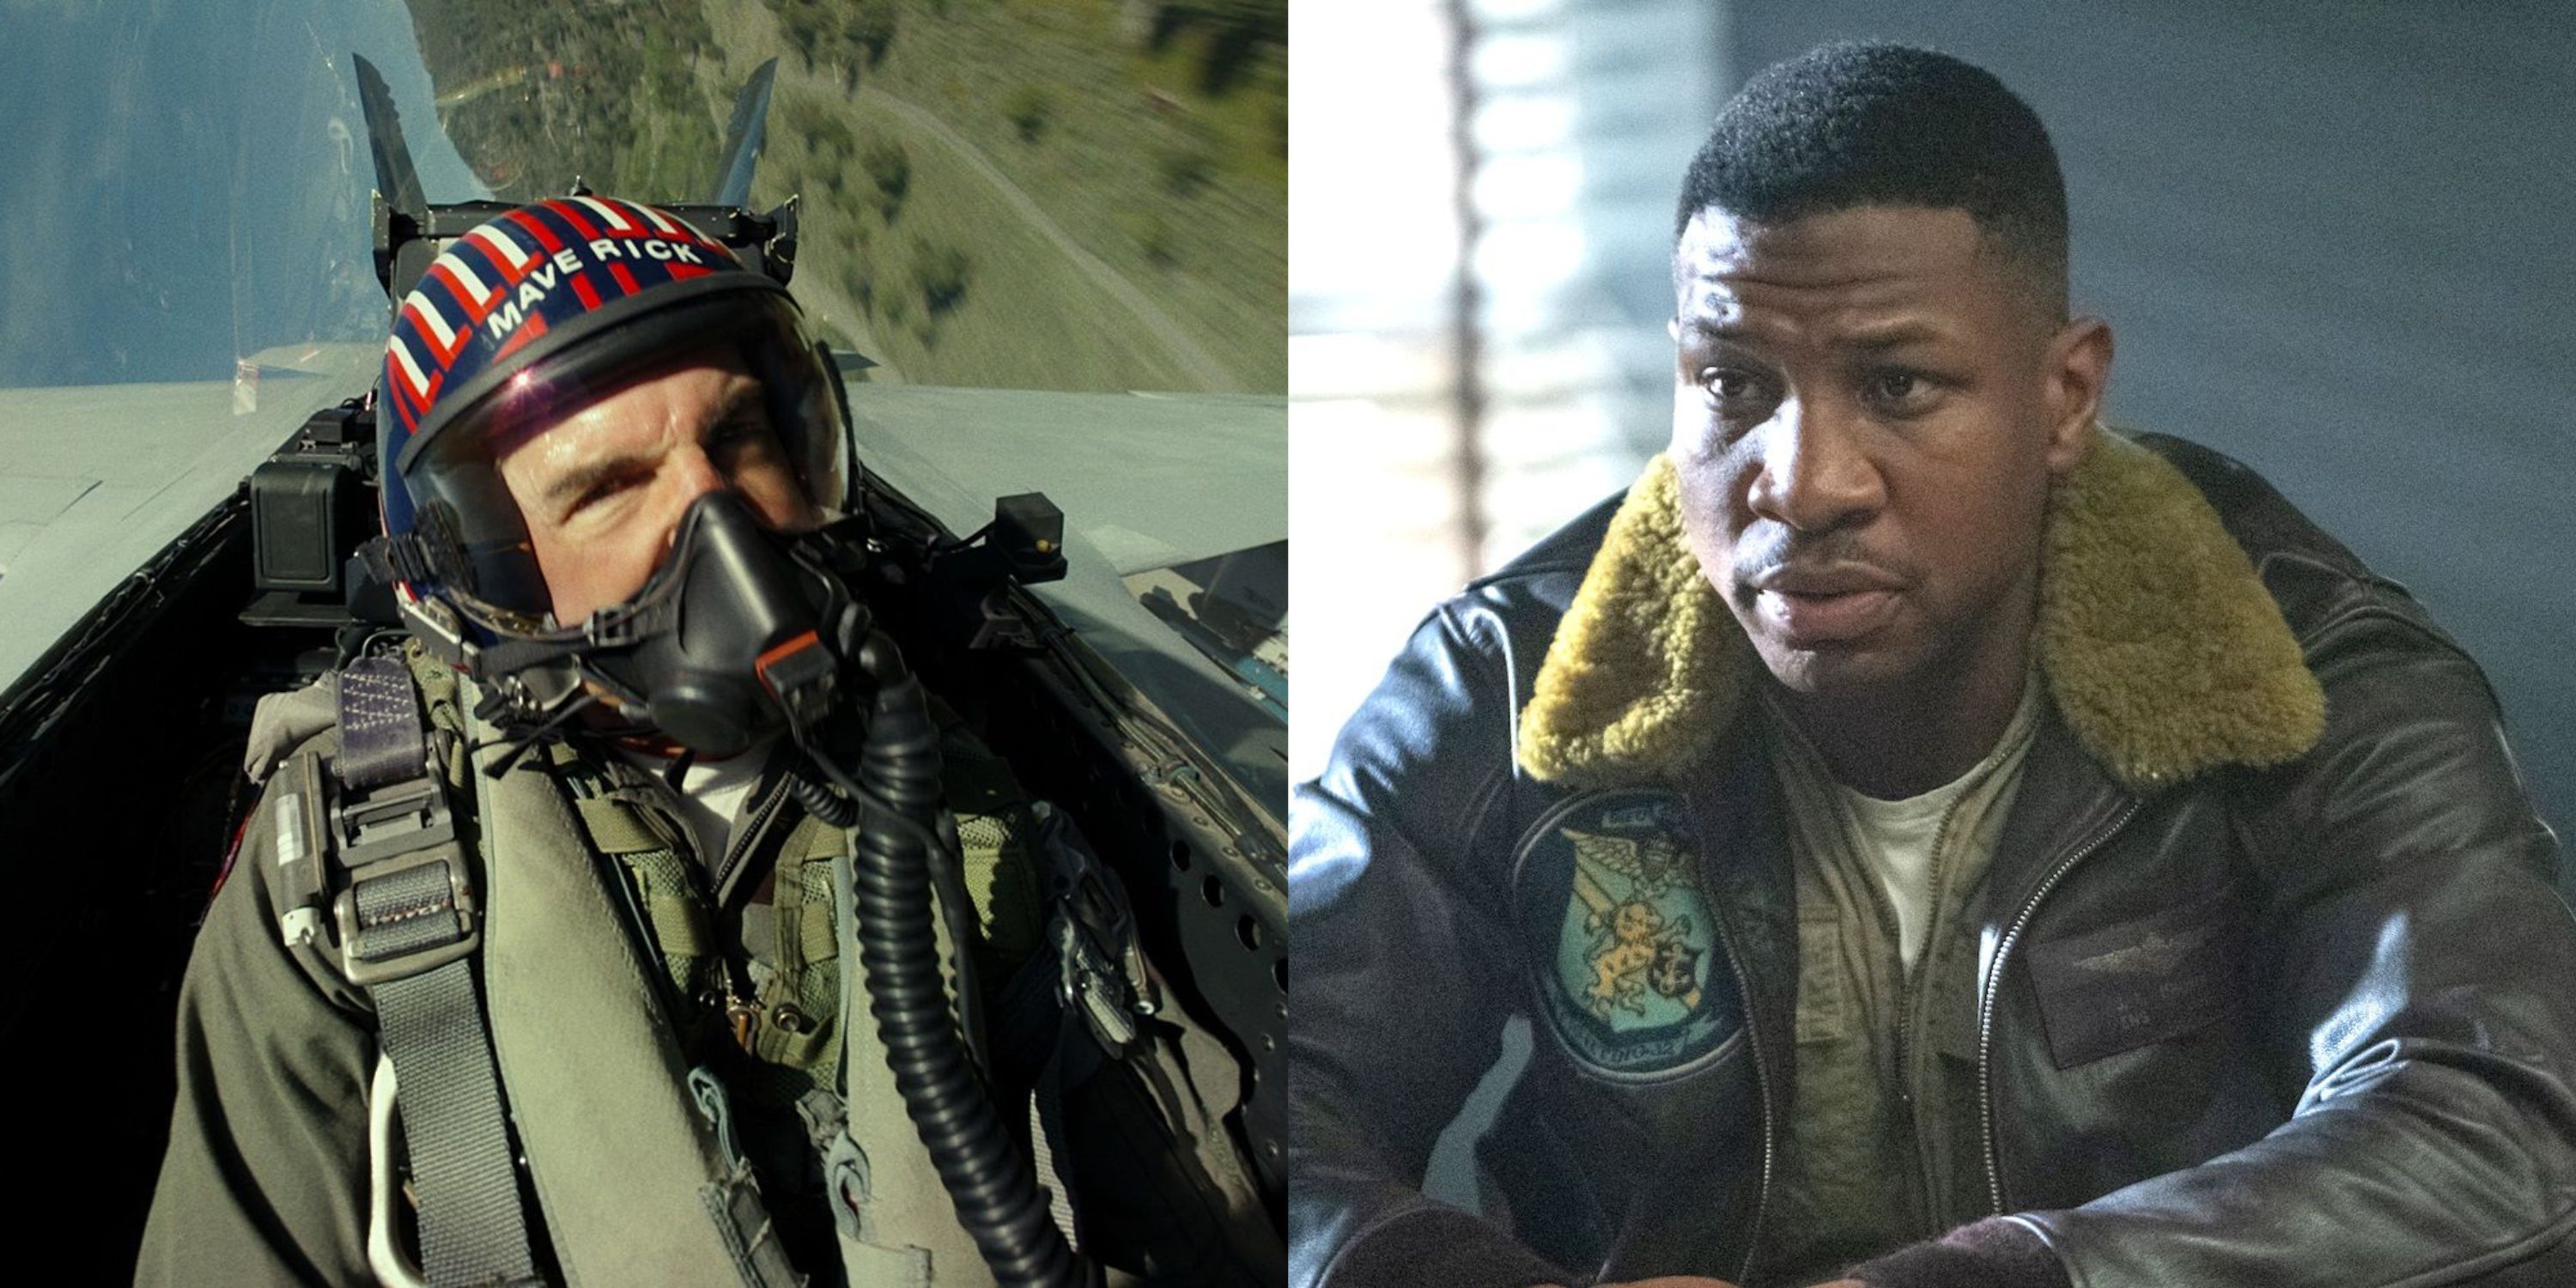 Featured image Tom Cruise flies a jet fighter in Top Gun Maverick and Jonathan Majors in thought in Devotion